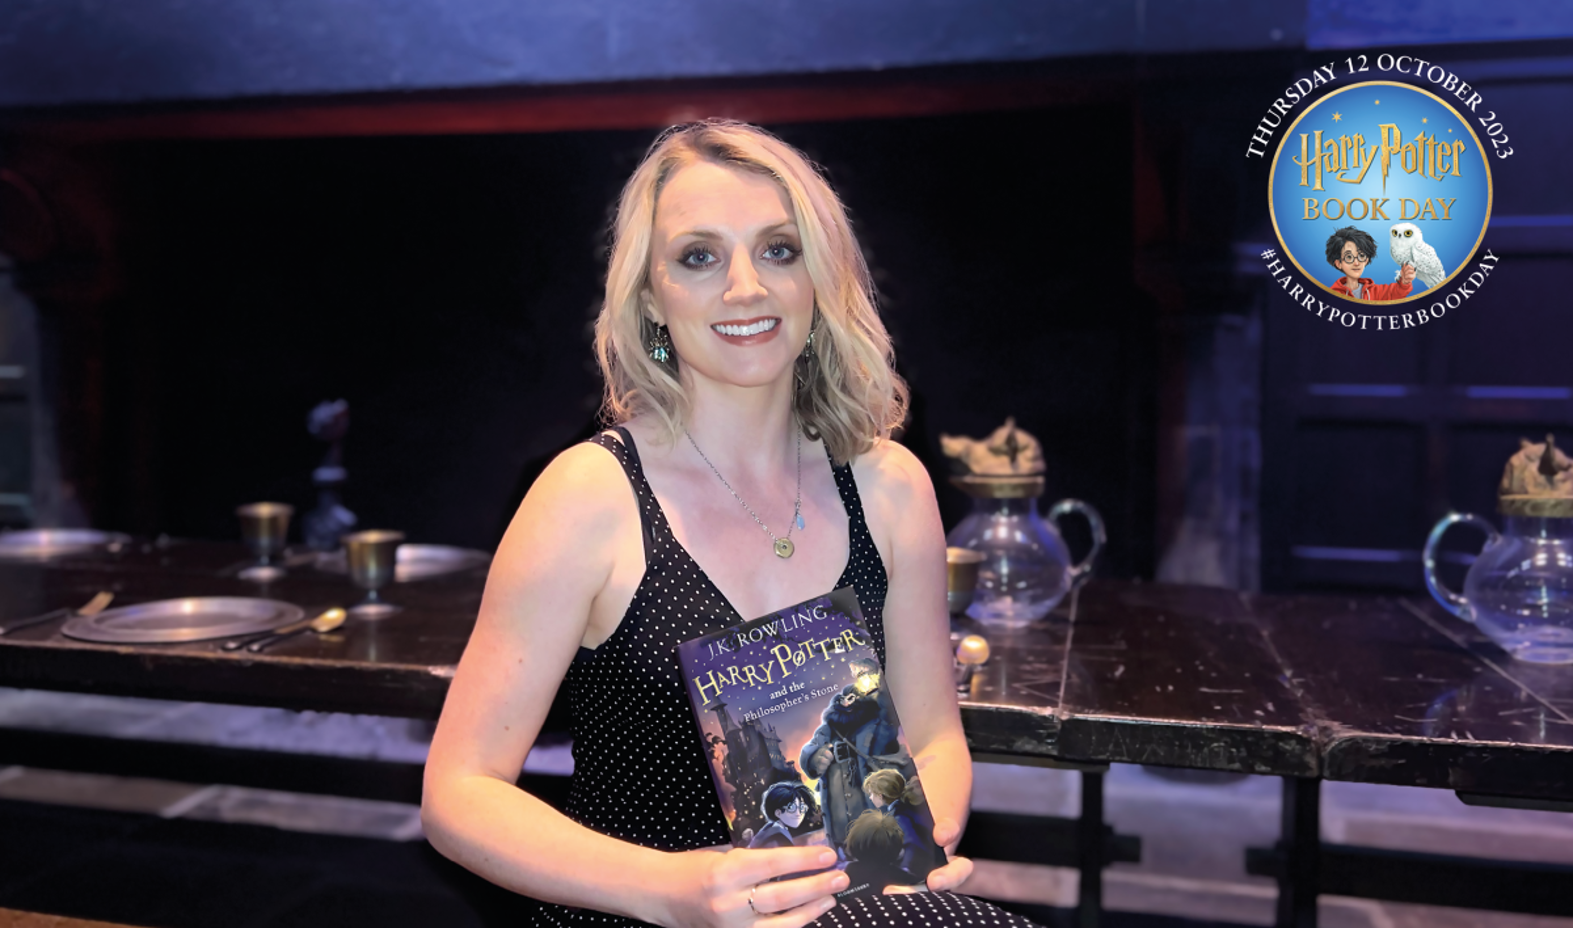 Join Evanna Lynch for a magical event this Harry Potter Book Day! ⚡